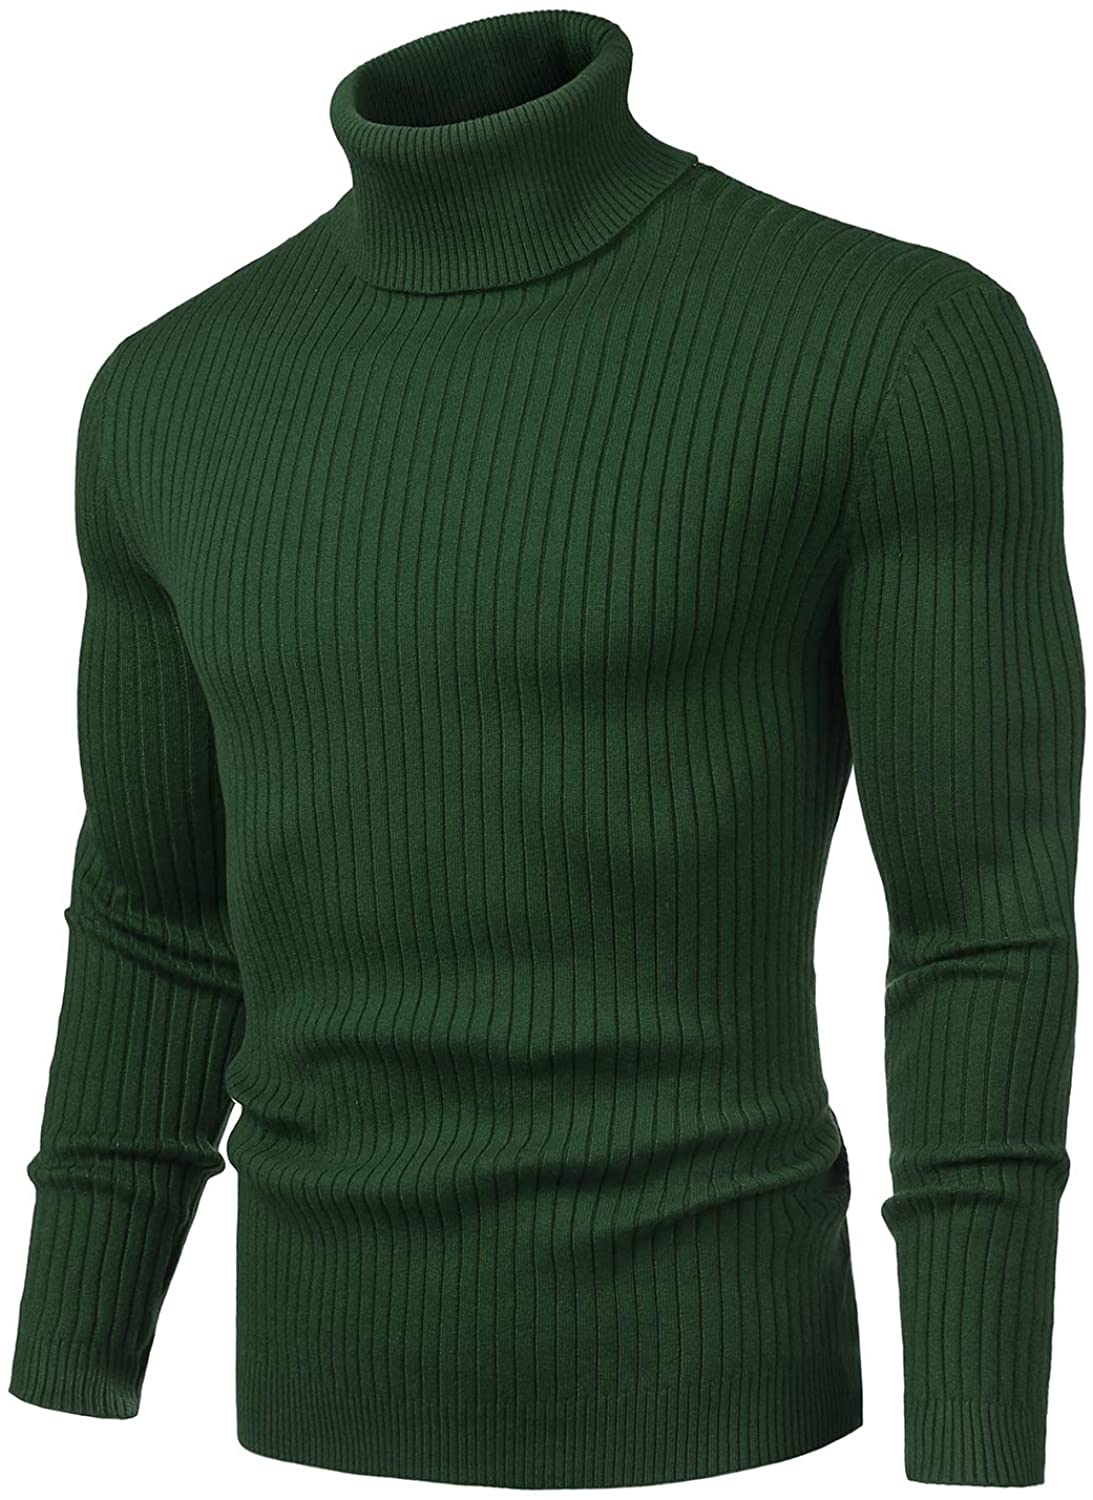 Bravepe Men Fall Winter Slim Knitted Solid Turtle Neck Pullover Sweater Jumper 